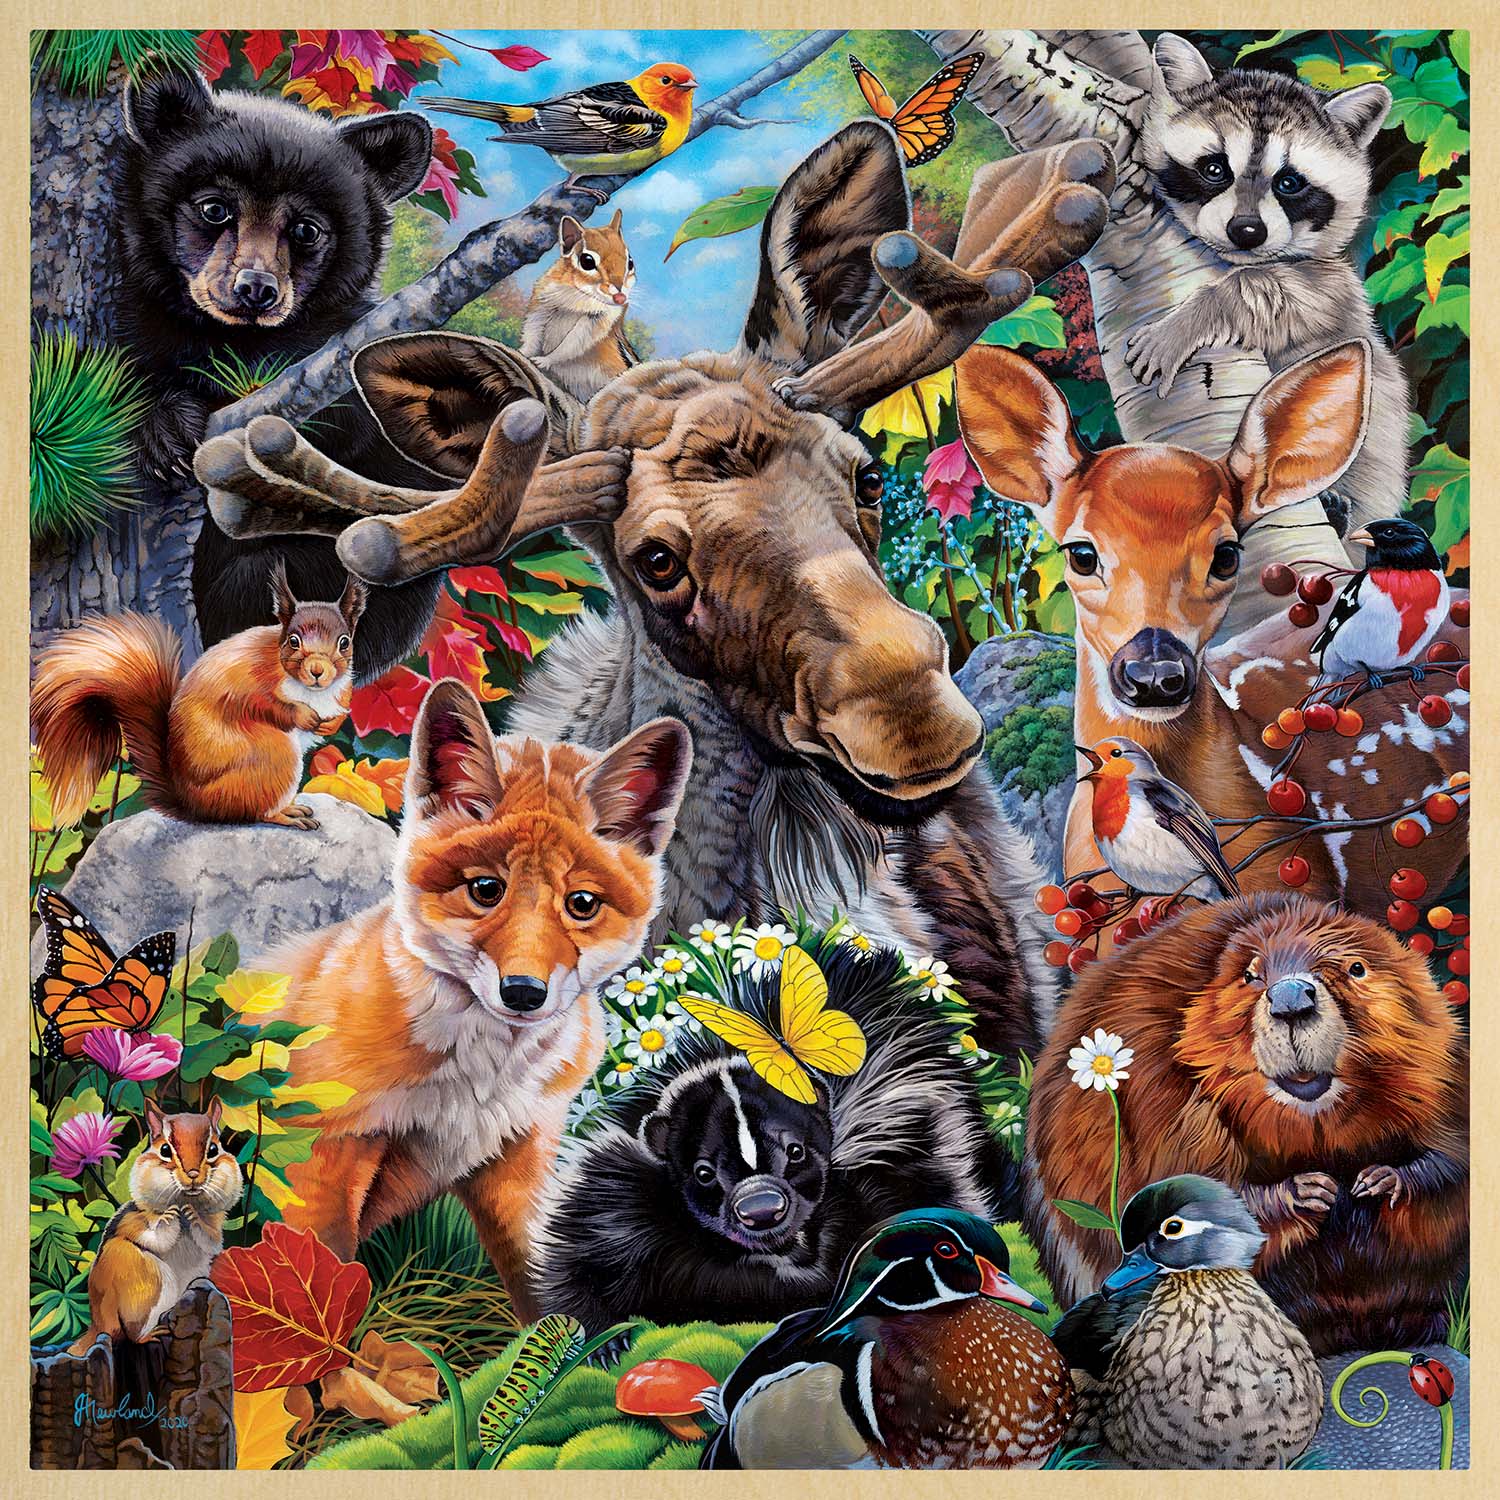 Wood Fun Facts - Woodland Friends  Forest Animal Jigsaw Puzzle